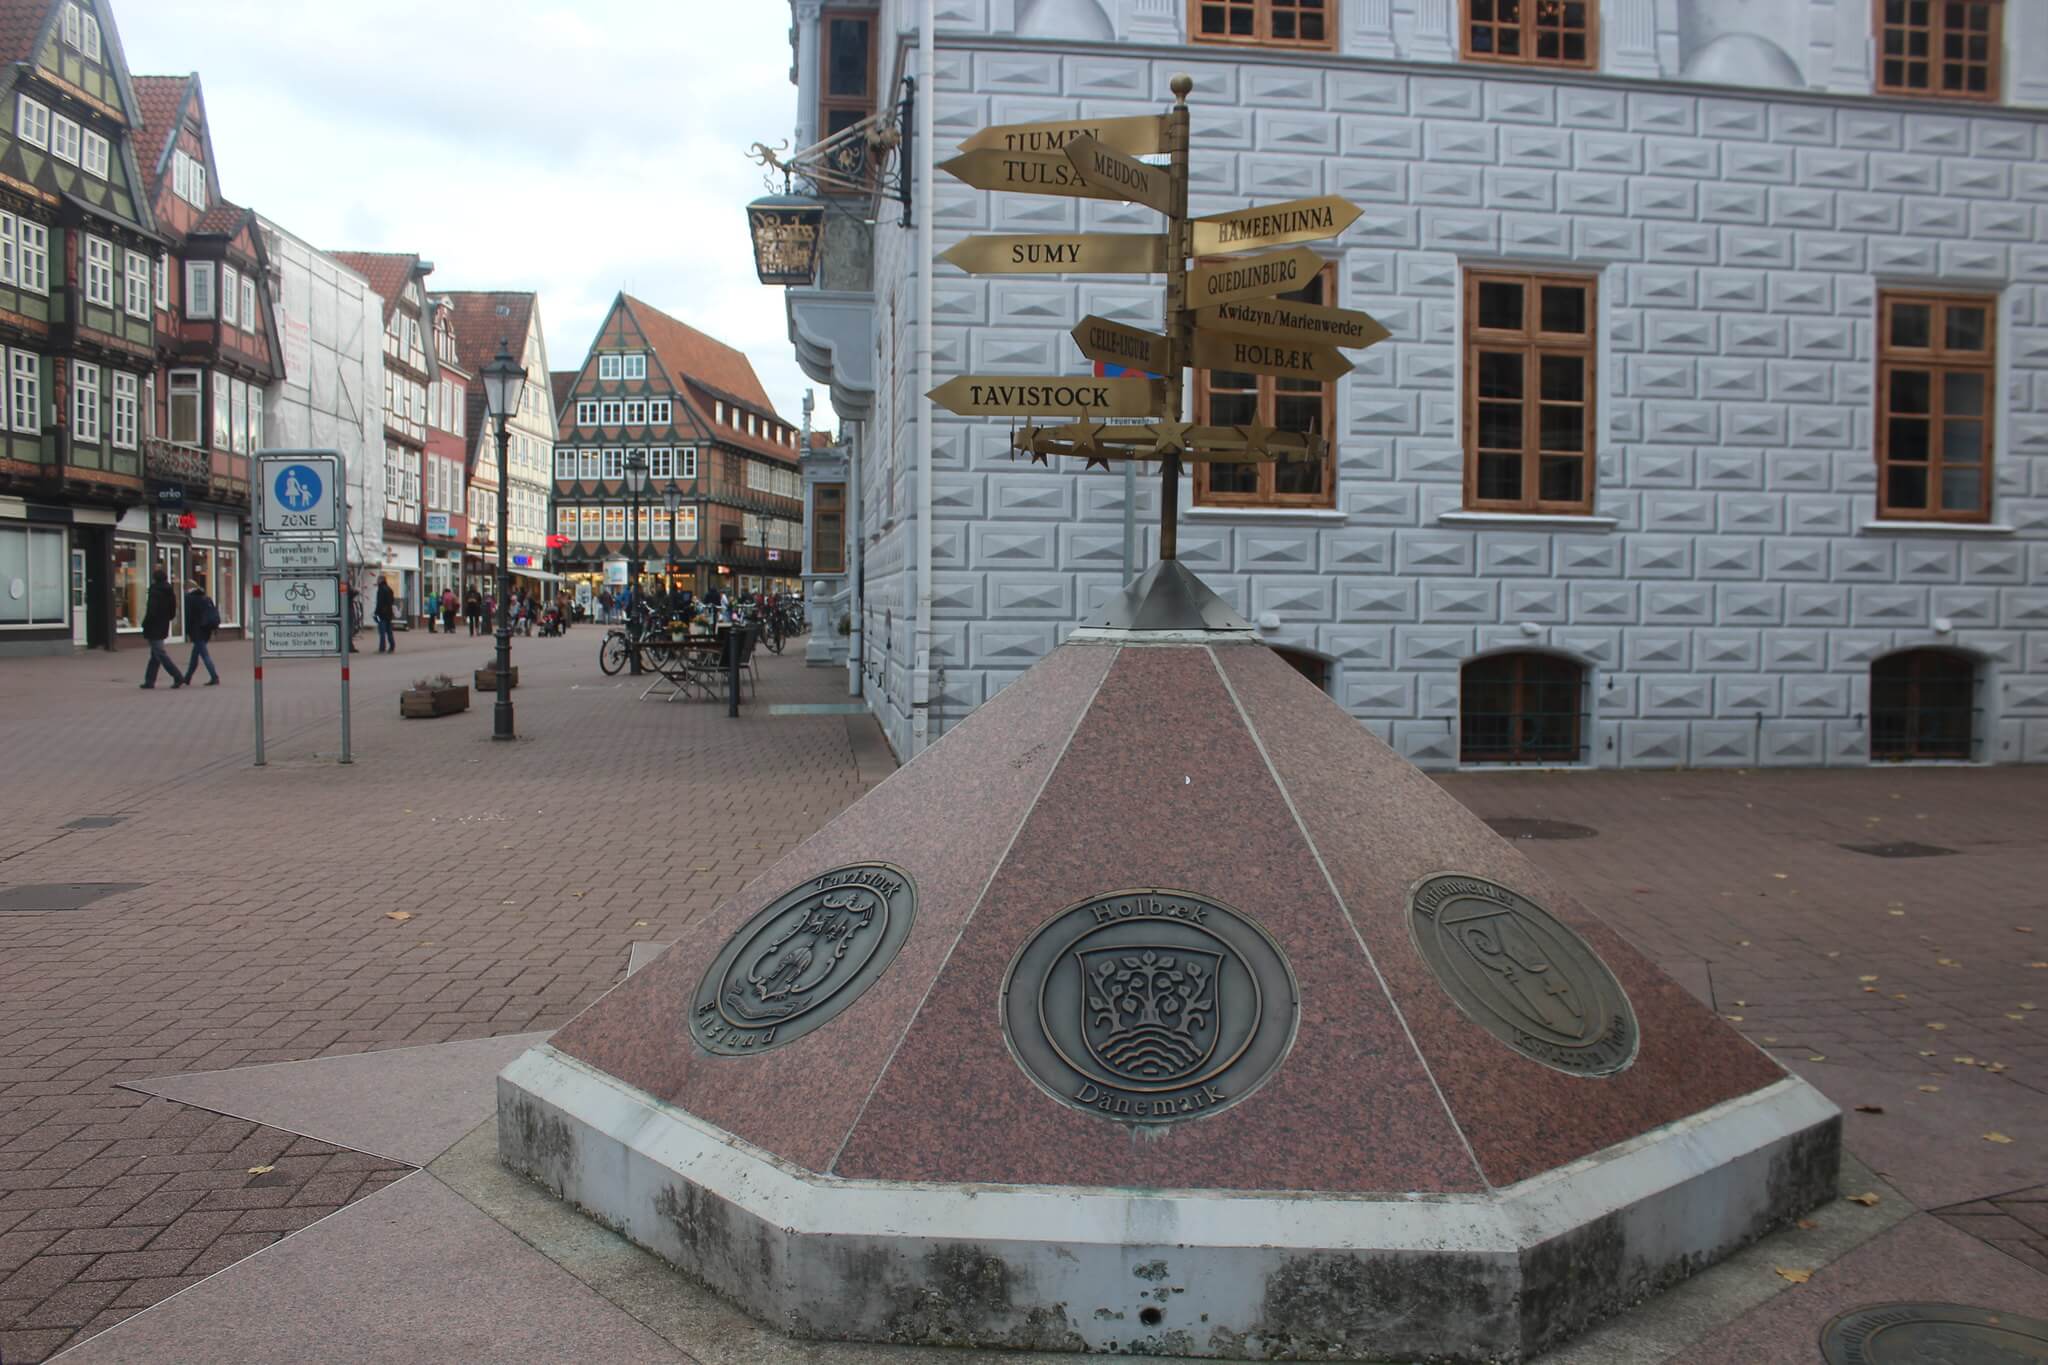 The old city hall square, Celle, Germany